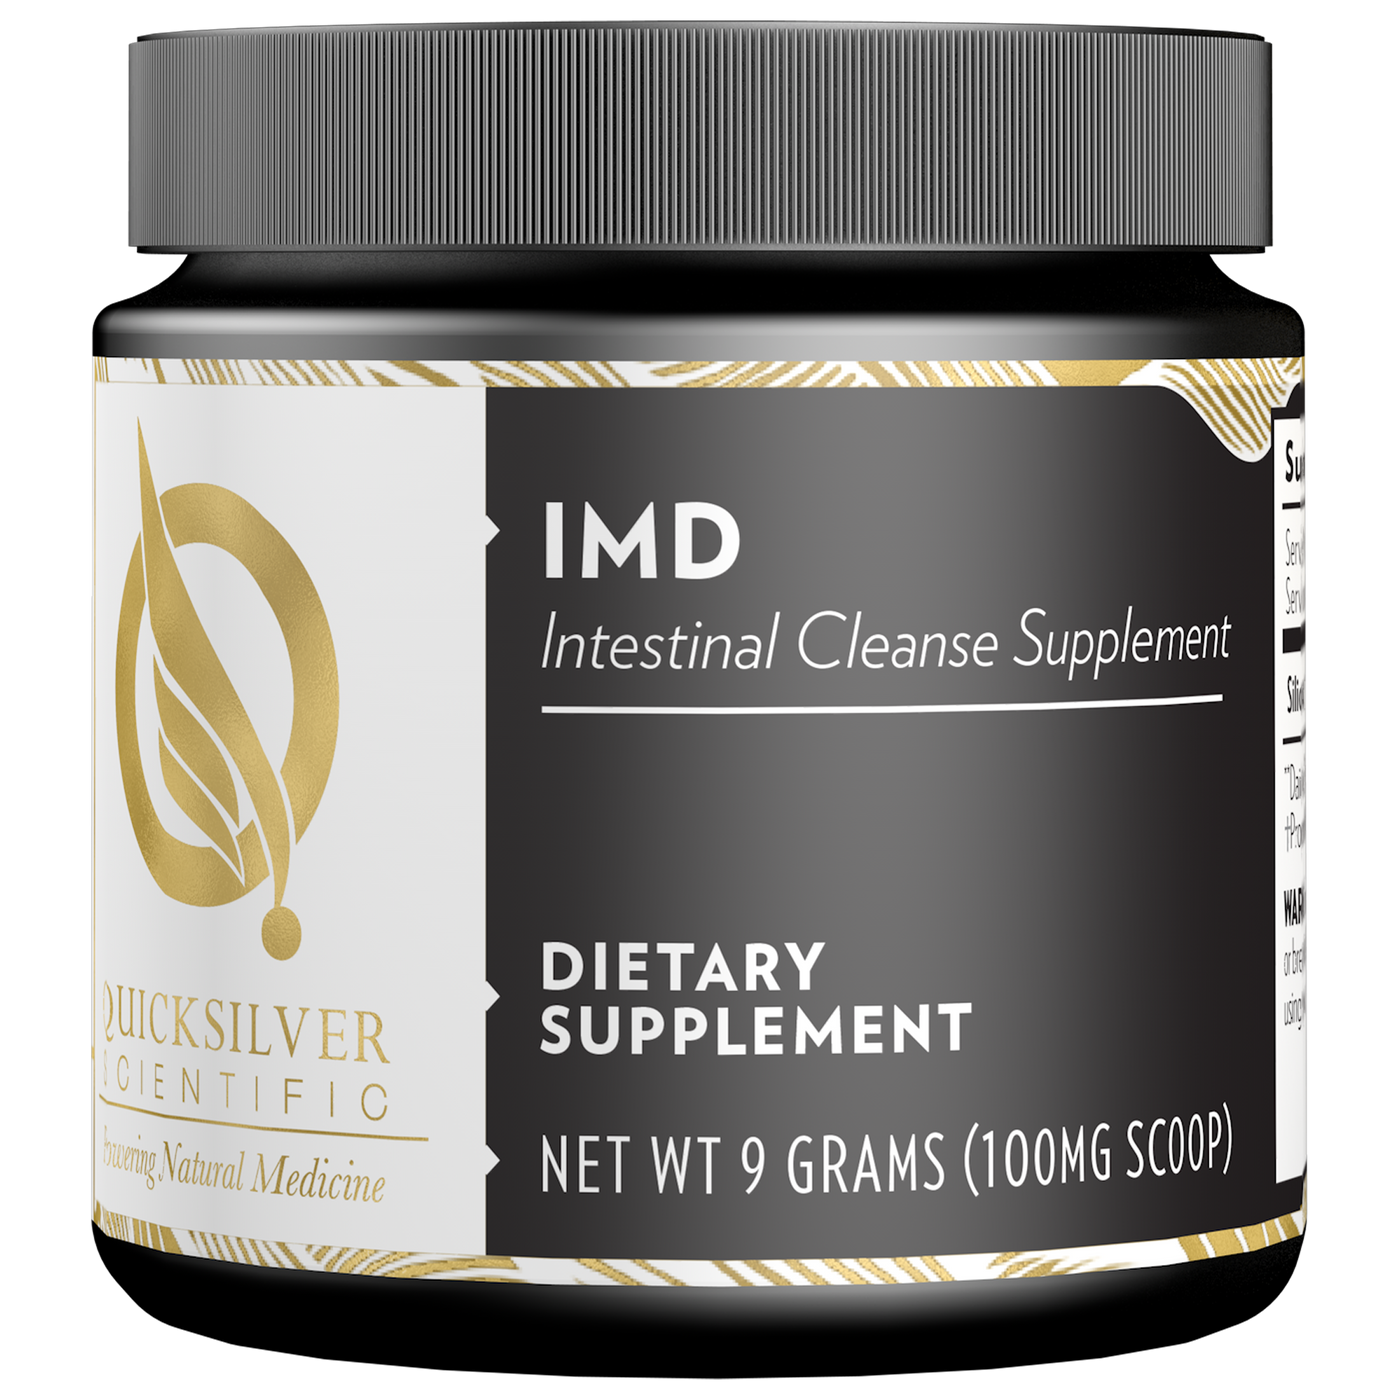 IMD Intestinal Cleanse Supplement 9 g Curated Wellness